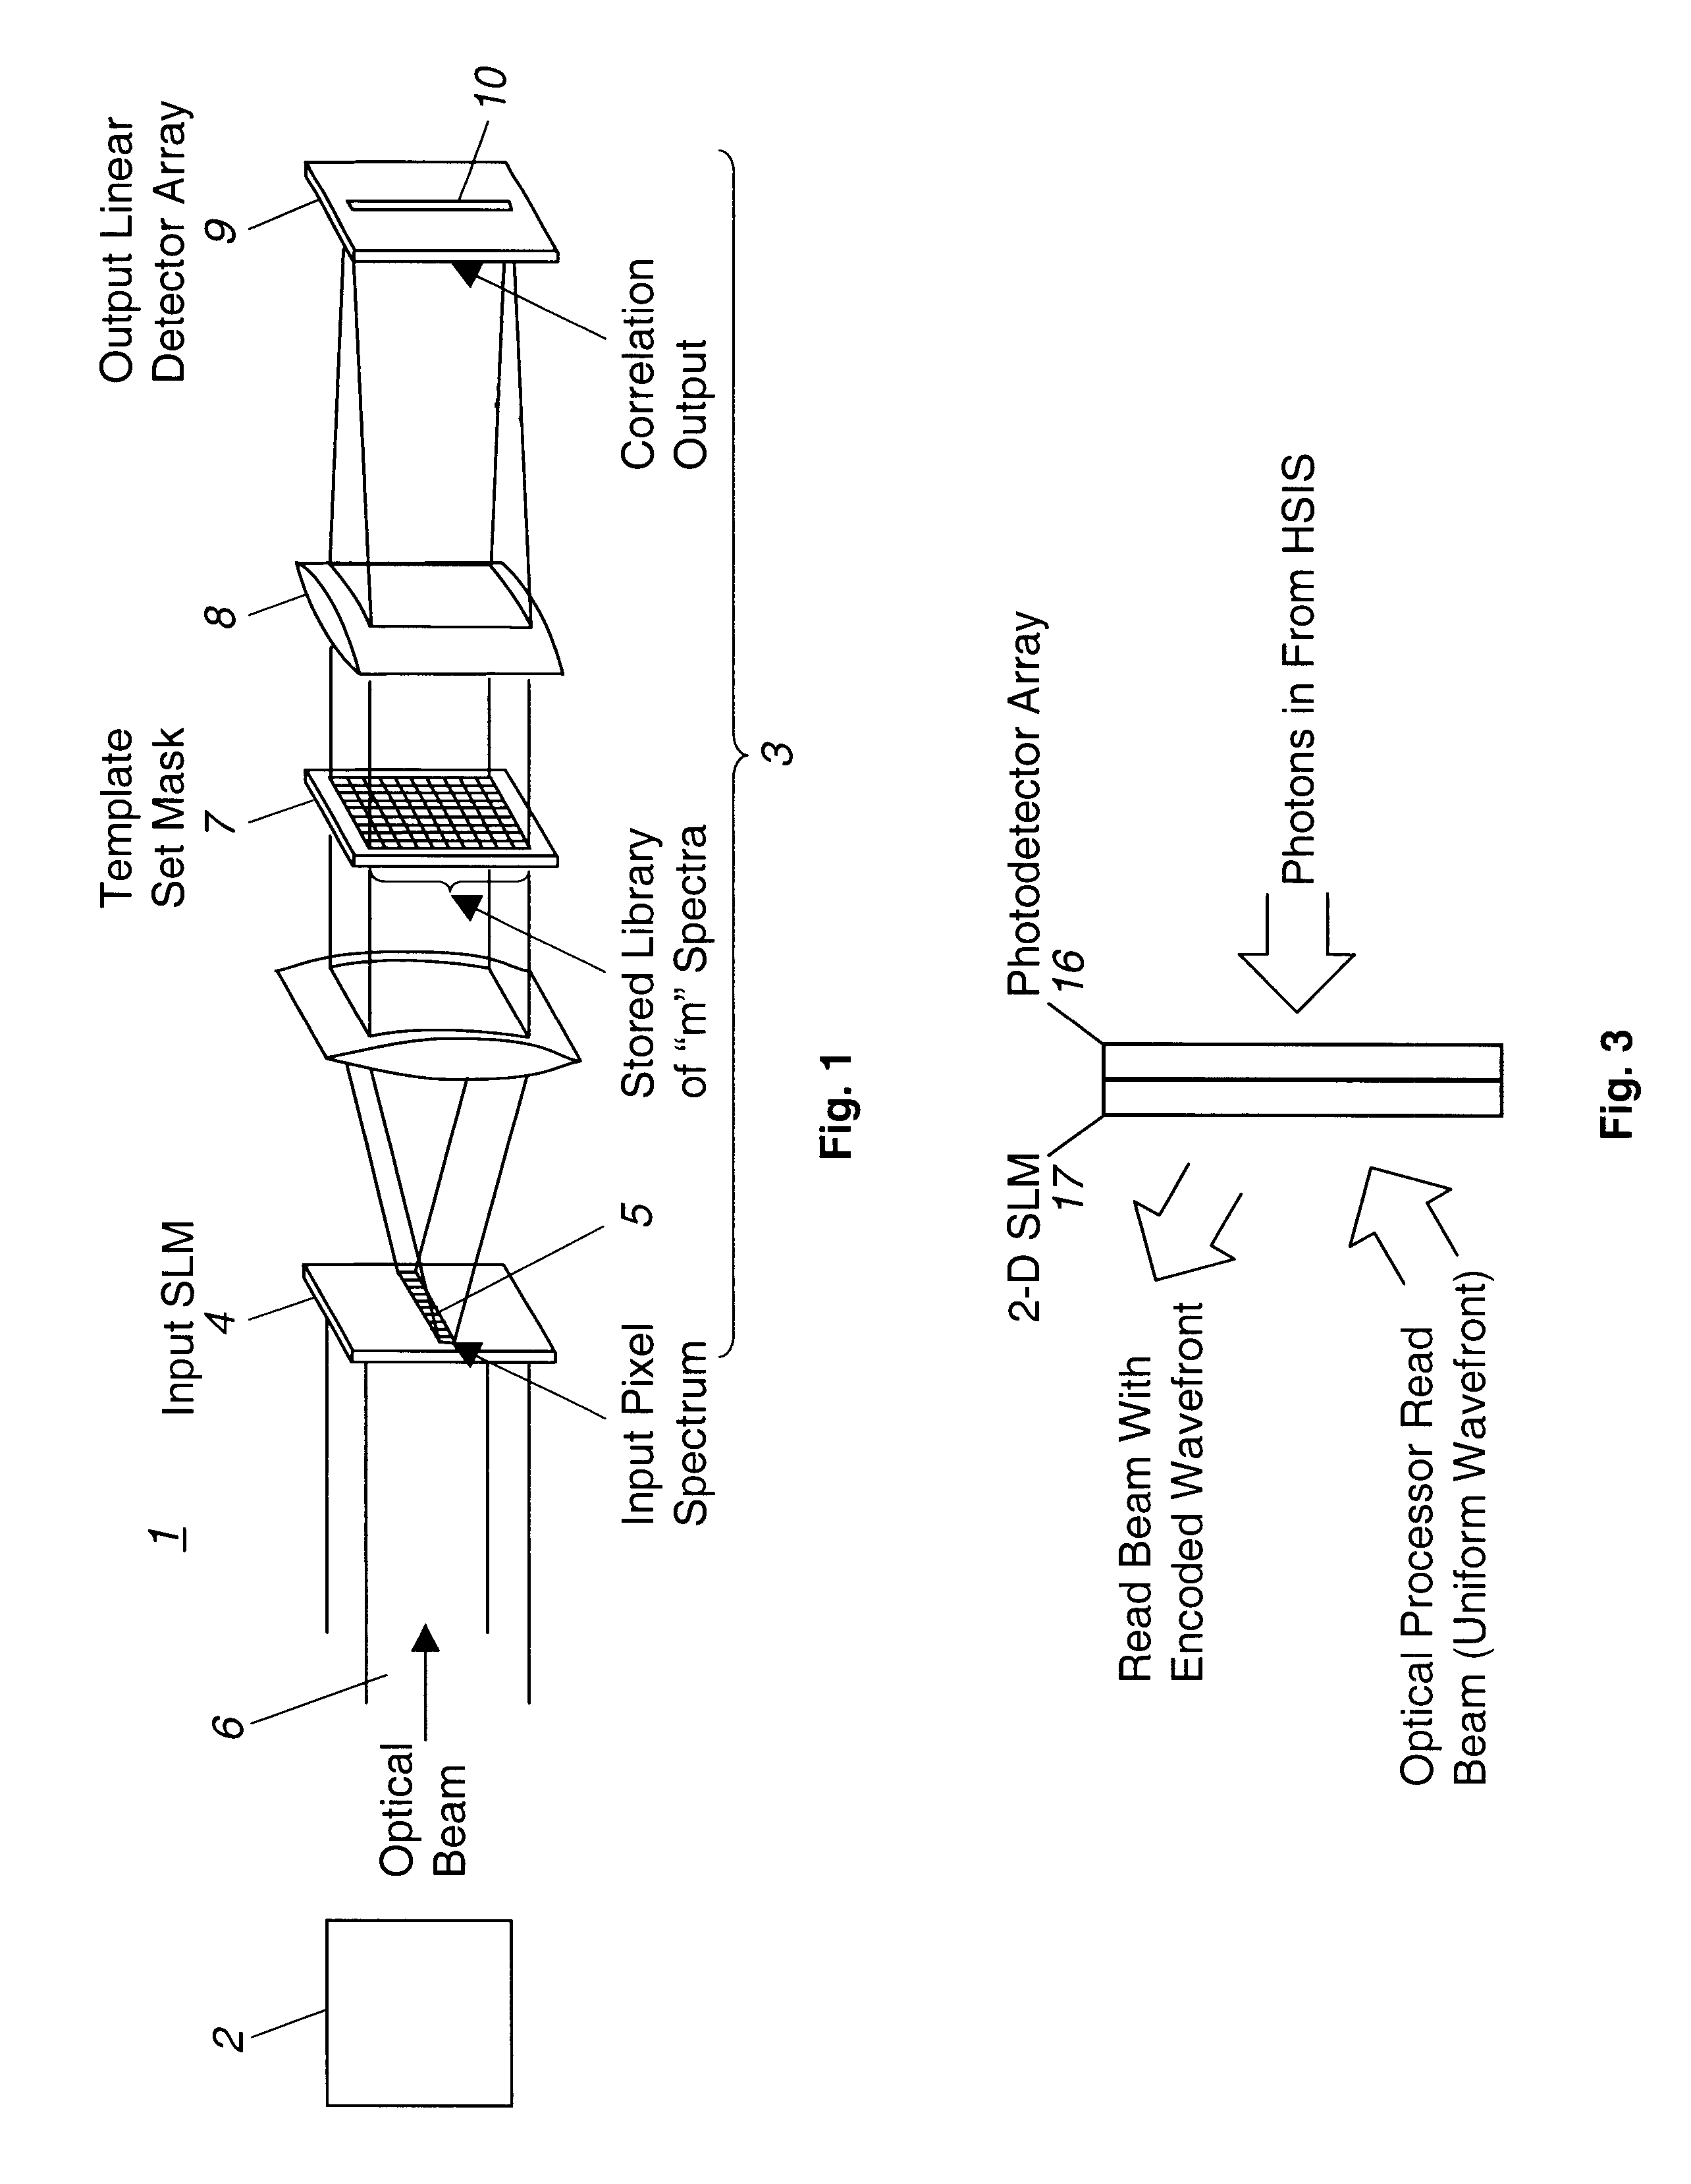 Multispectral imaging system and method